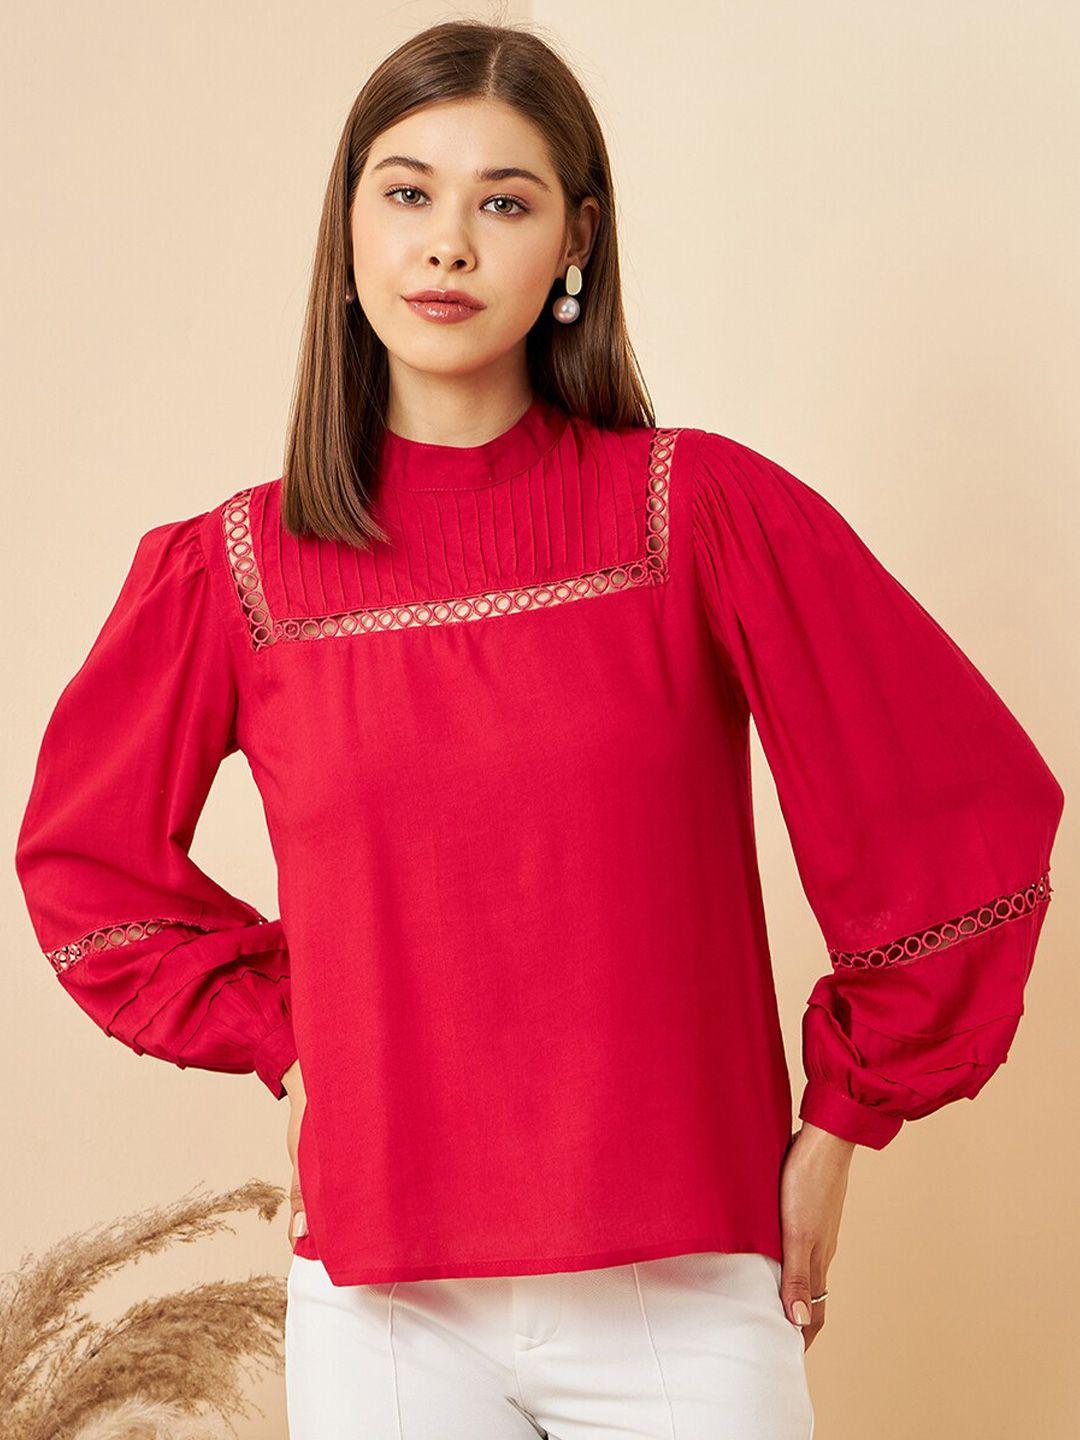 rare fuchsia cuffed sleeves high neck top with pin tacks details